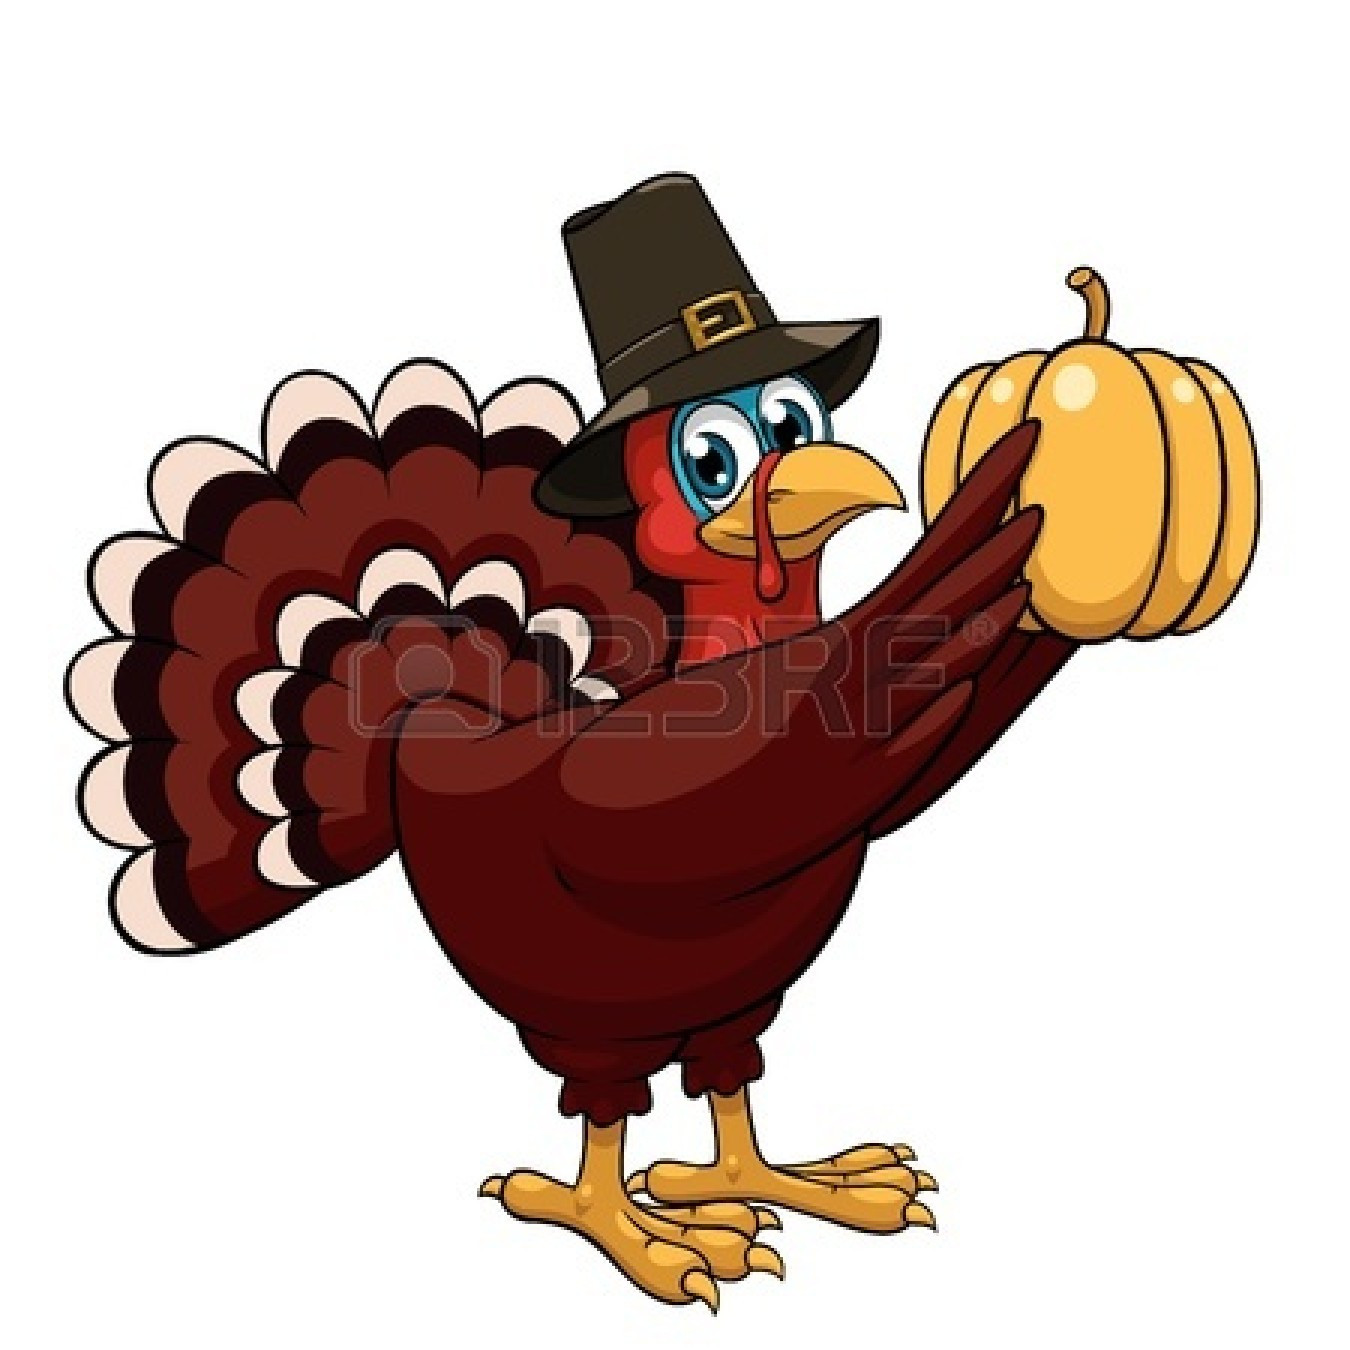 Thanksgiving Turkey Cartoon Images
 Happy Thanksgiving Turkey Clipart Black And White